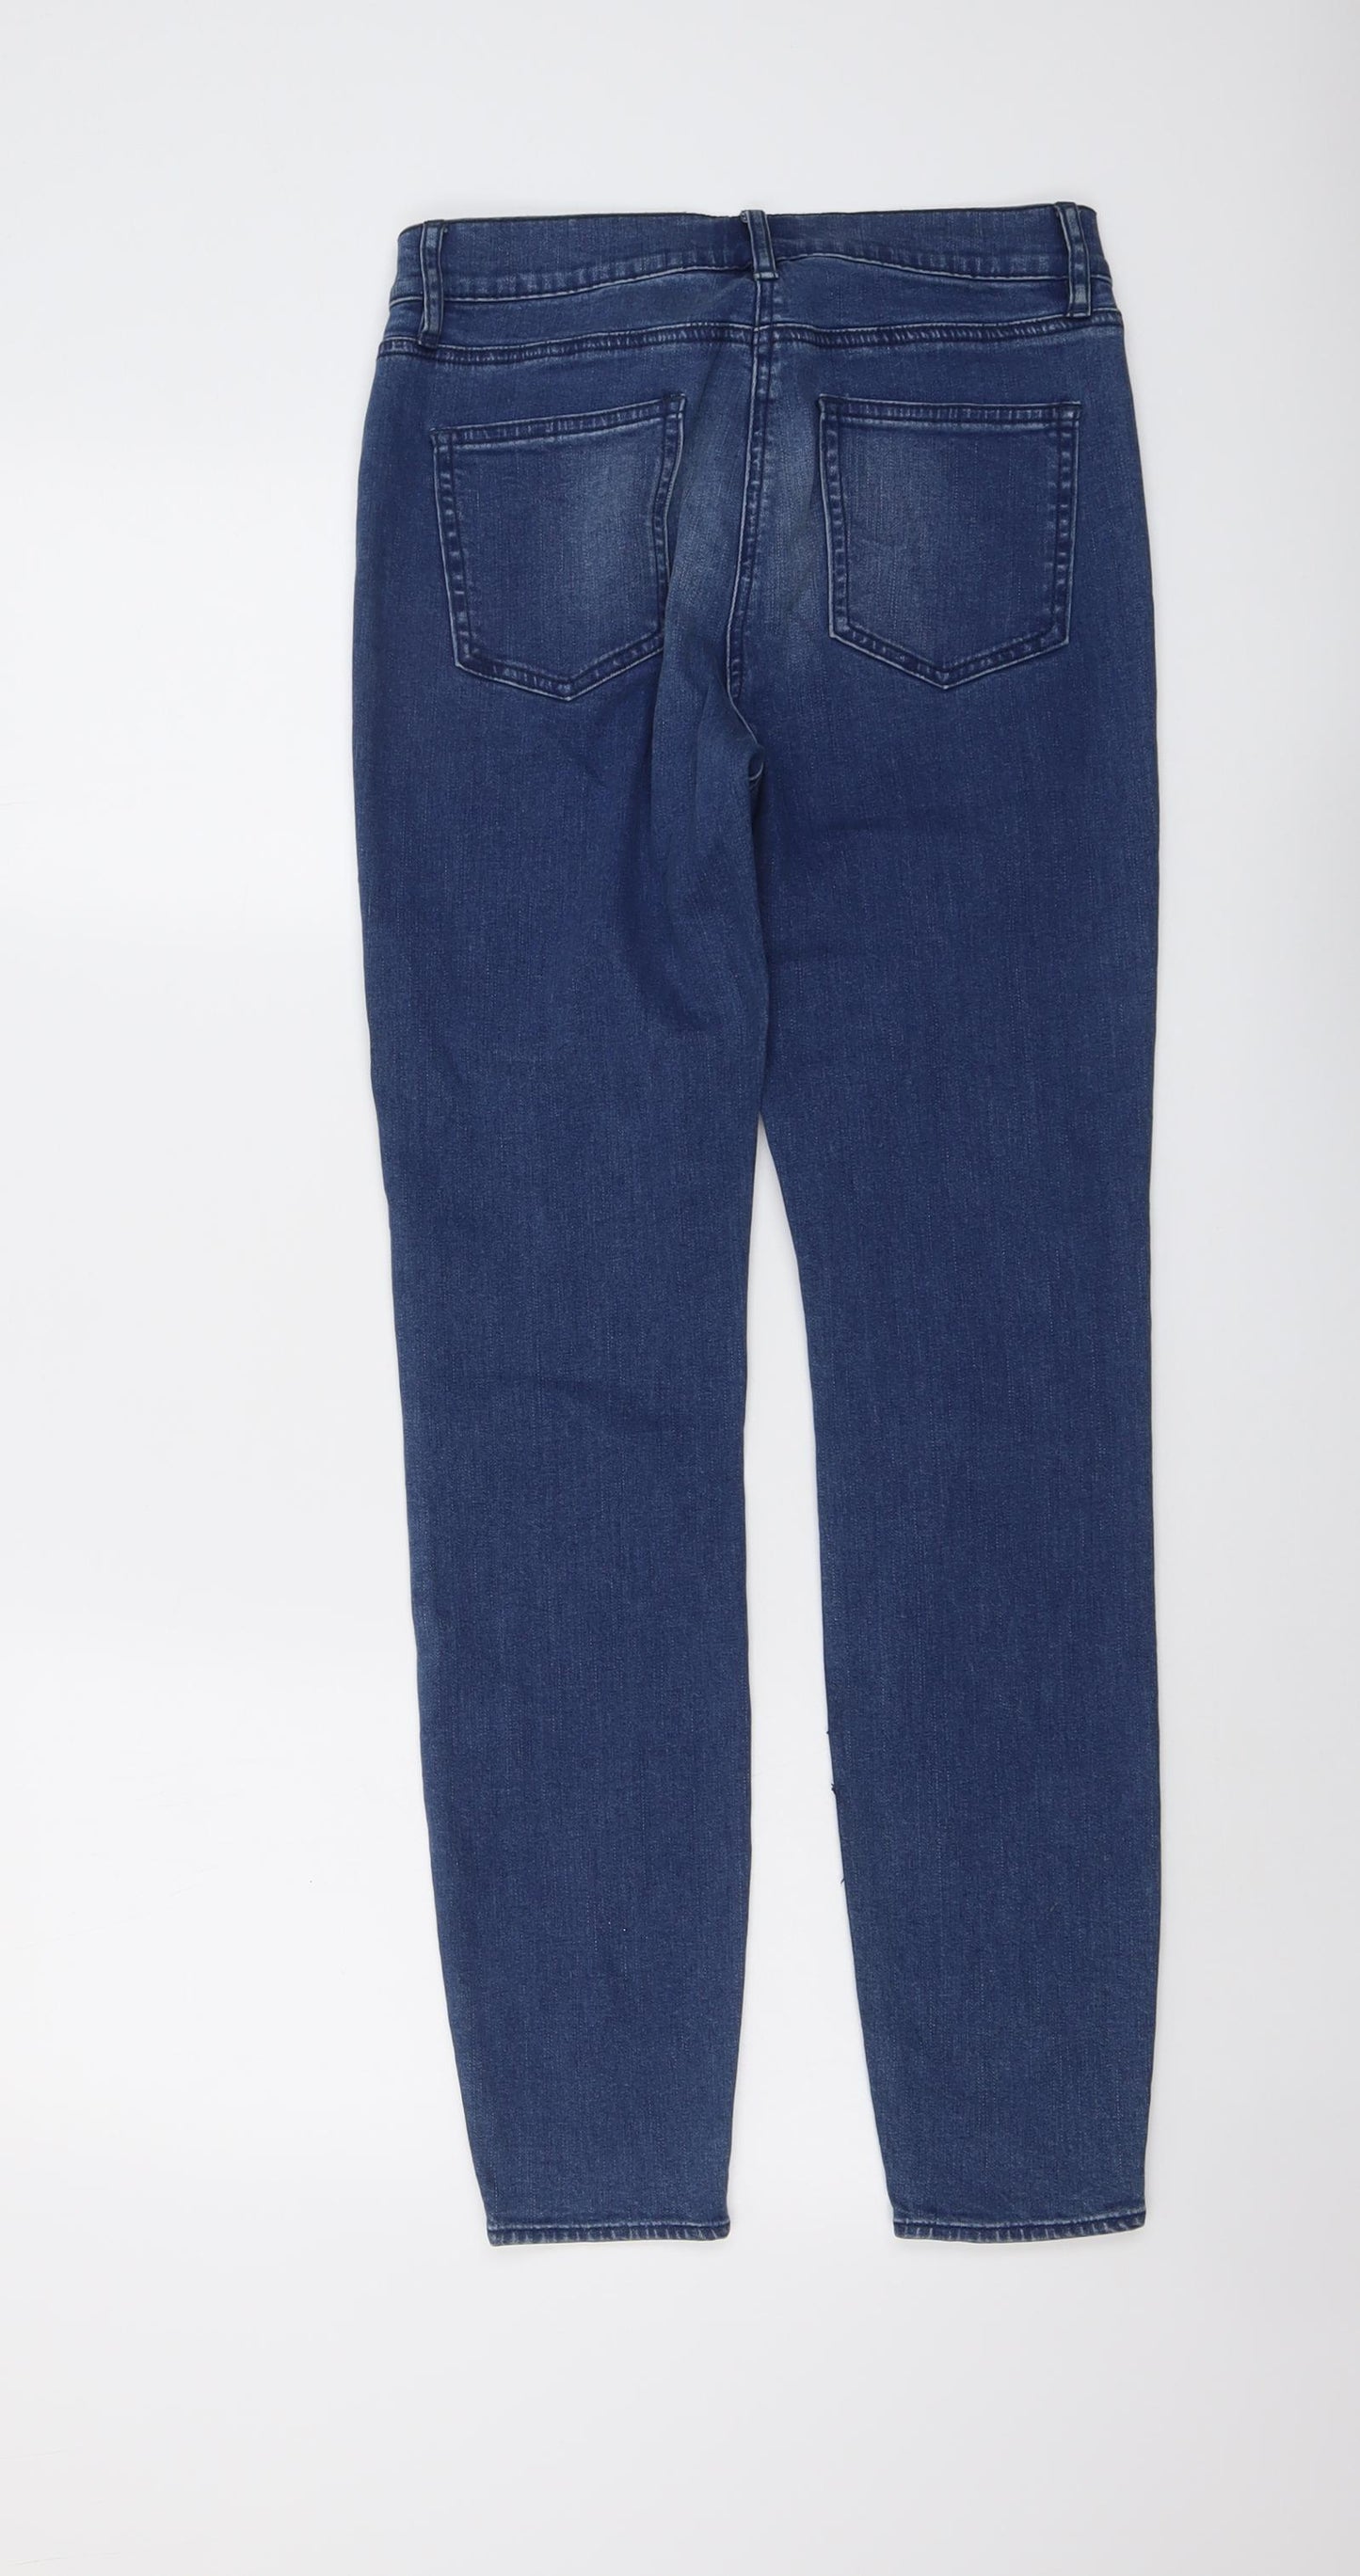 Seed Womens Blue Cotton Skinny Jeans Size 10 L29 in Regular Button